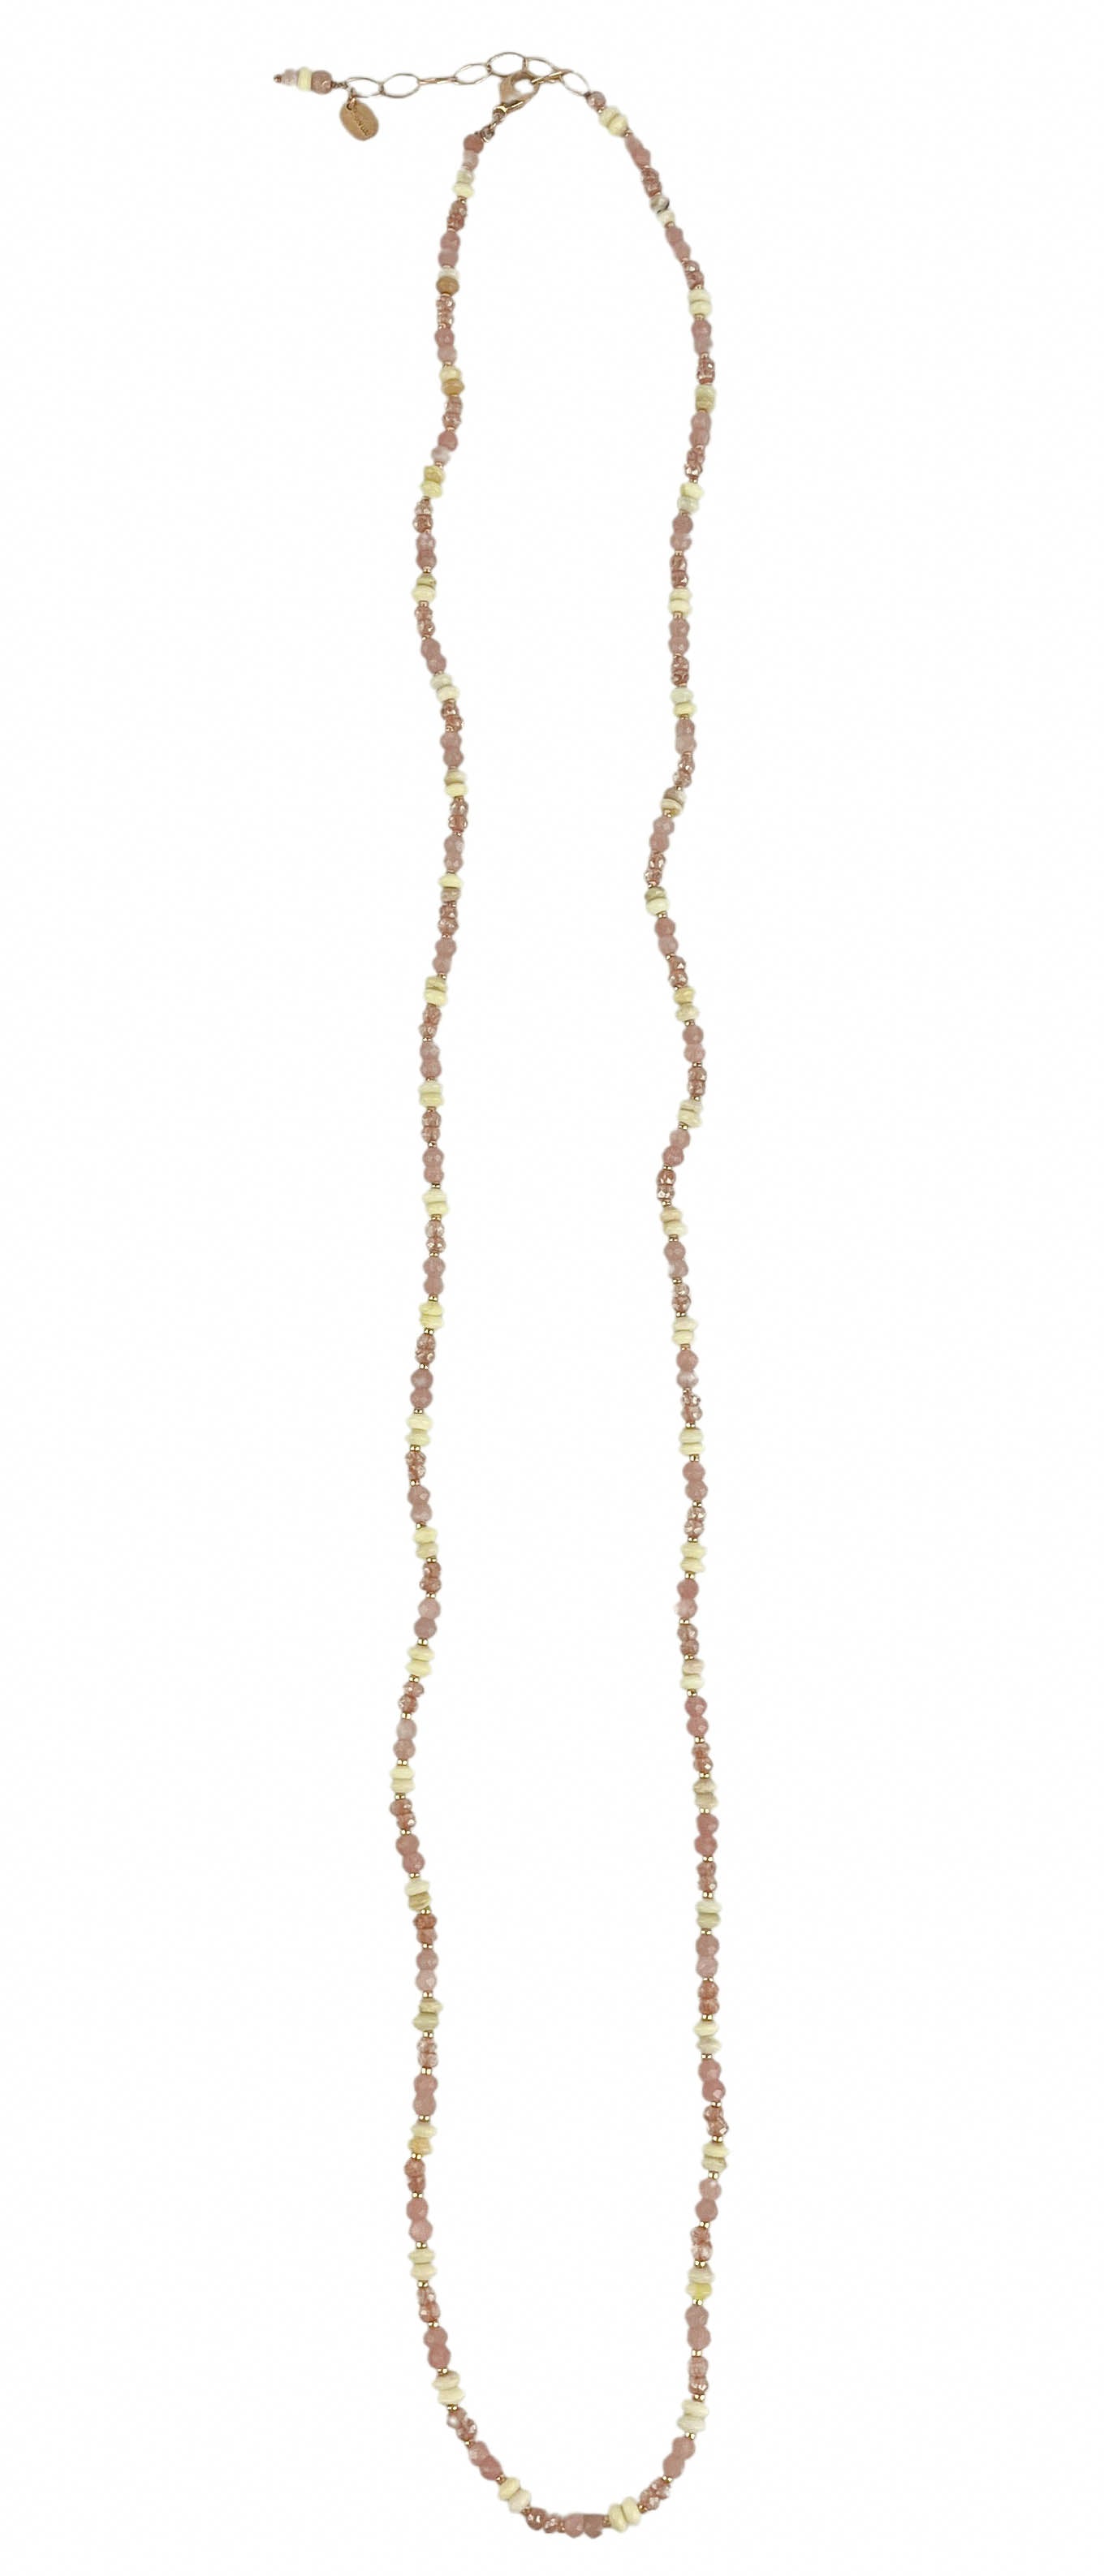 Chan Luu Grand Odyssey Necklace in Citrine Mix - Discounts on Chan Luu at UAL